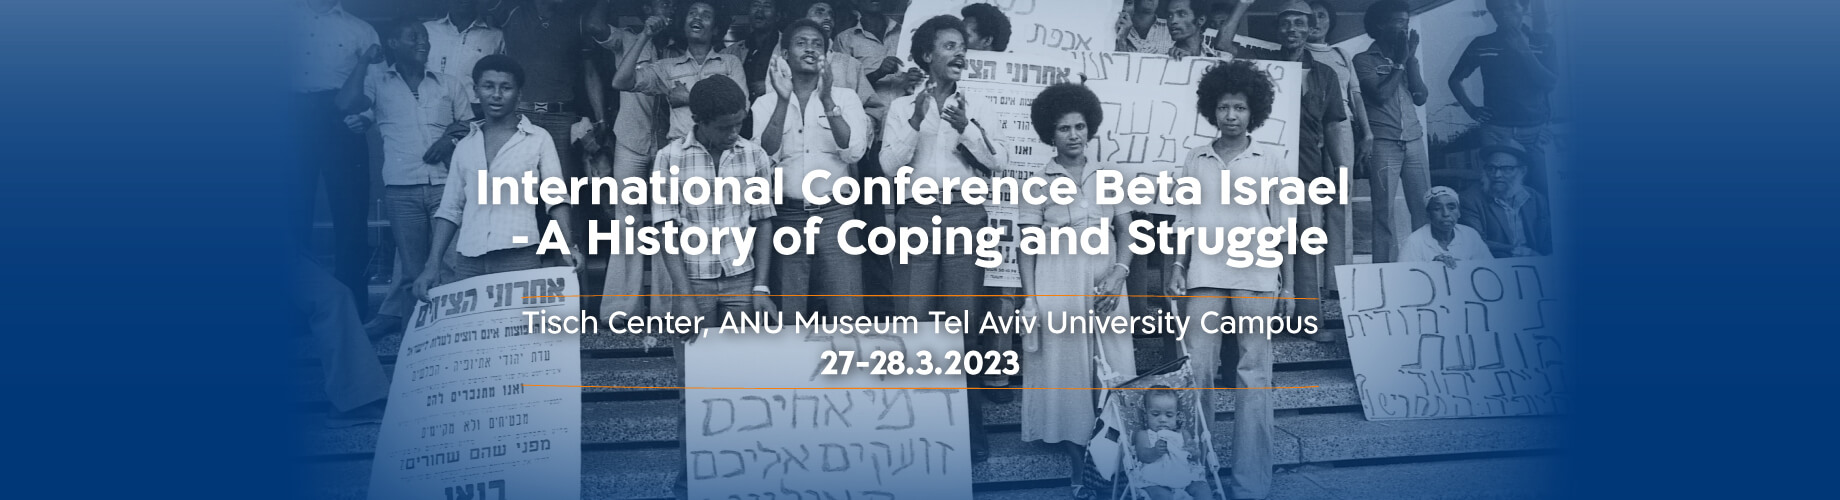 International Conference “Beta Israel – A History of Coping and Struggle